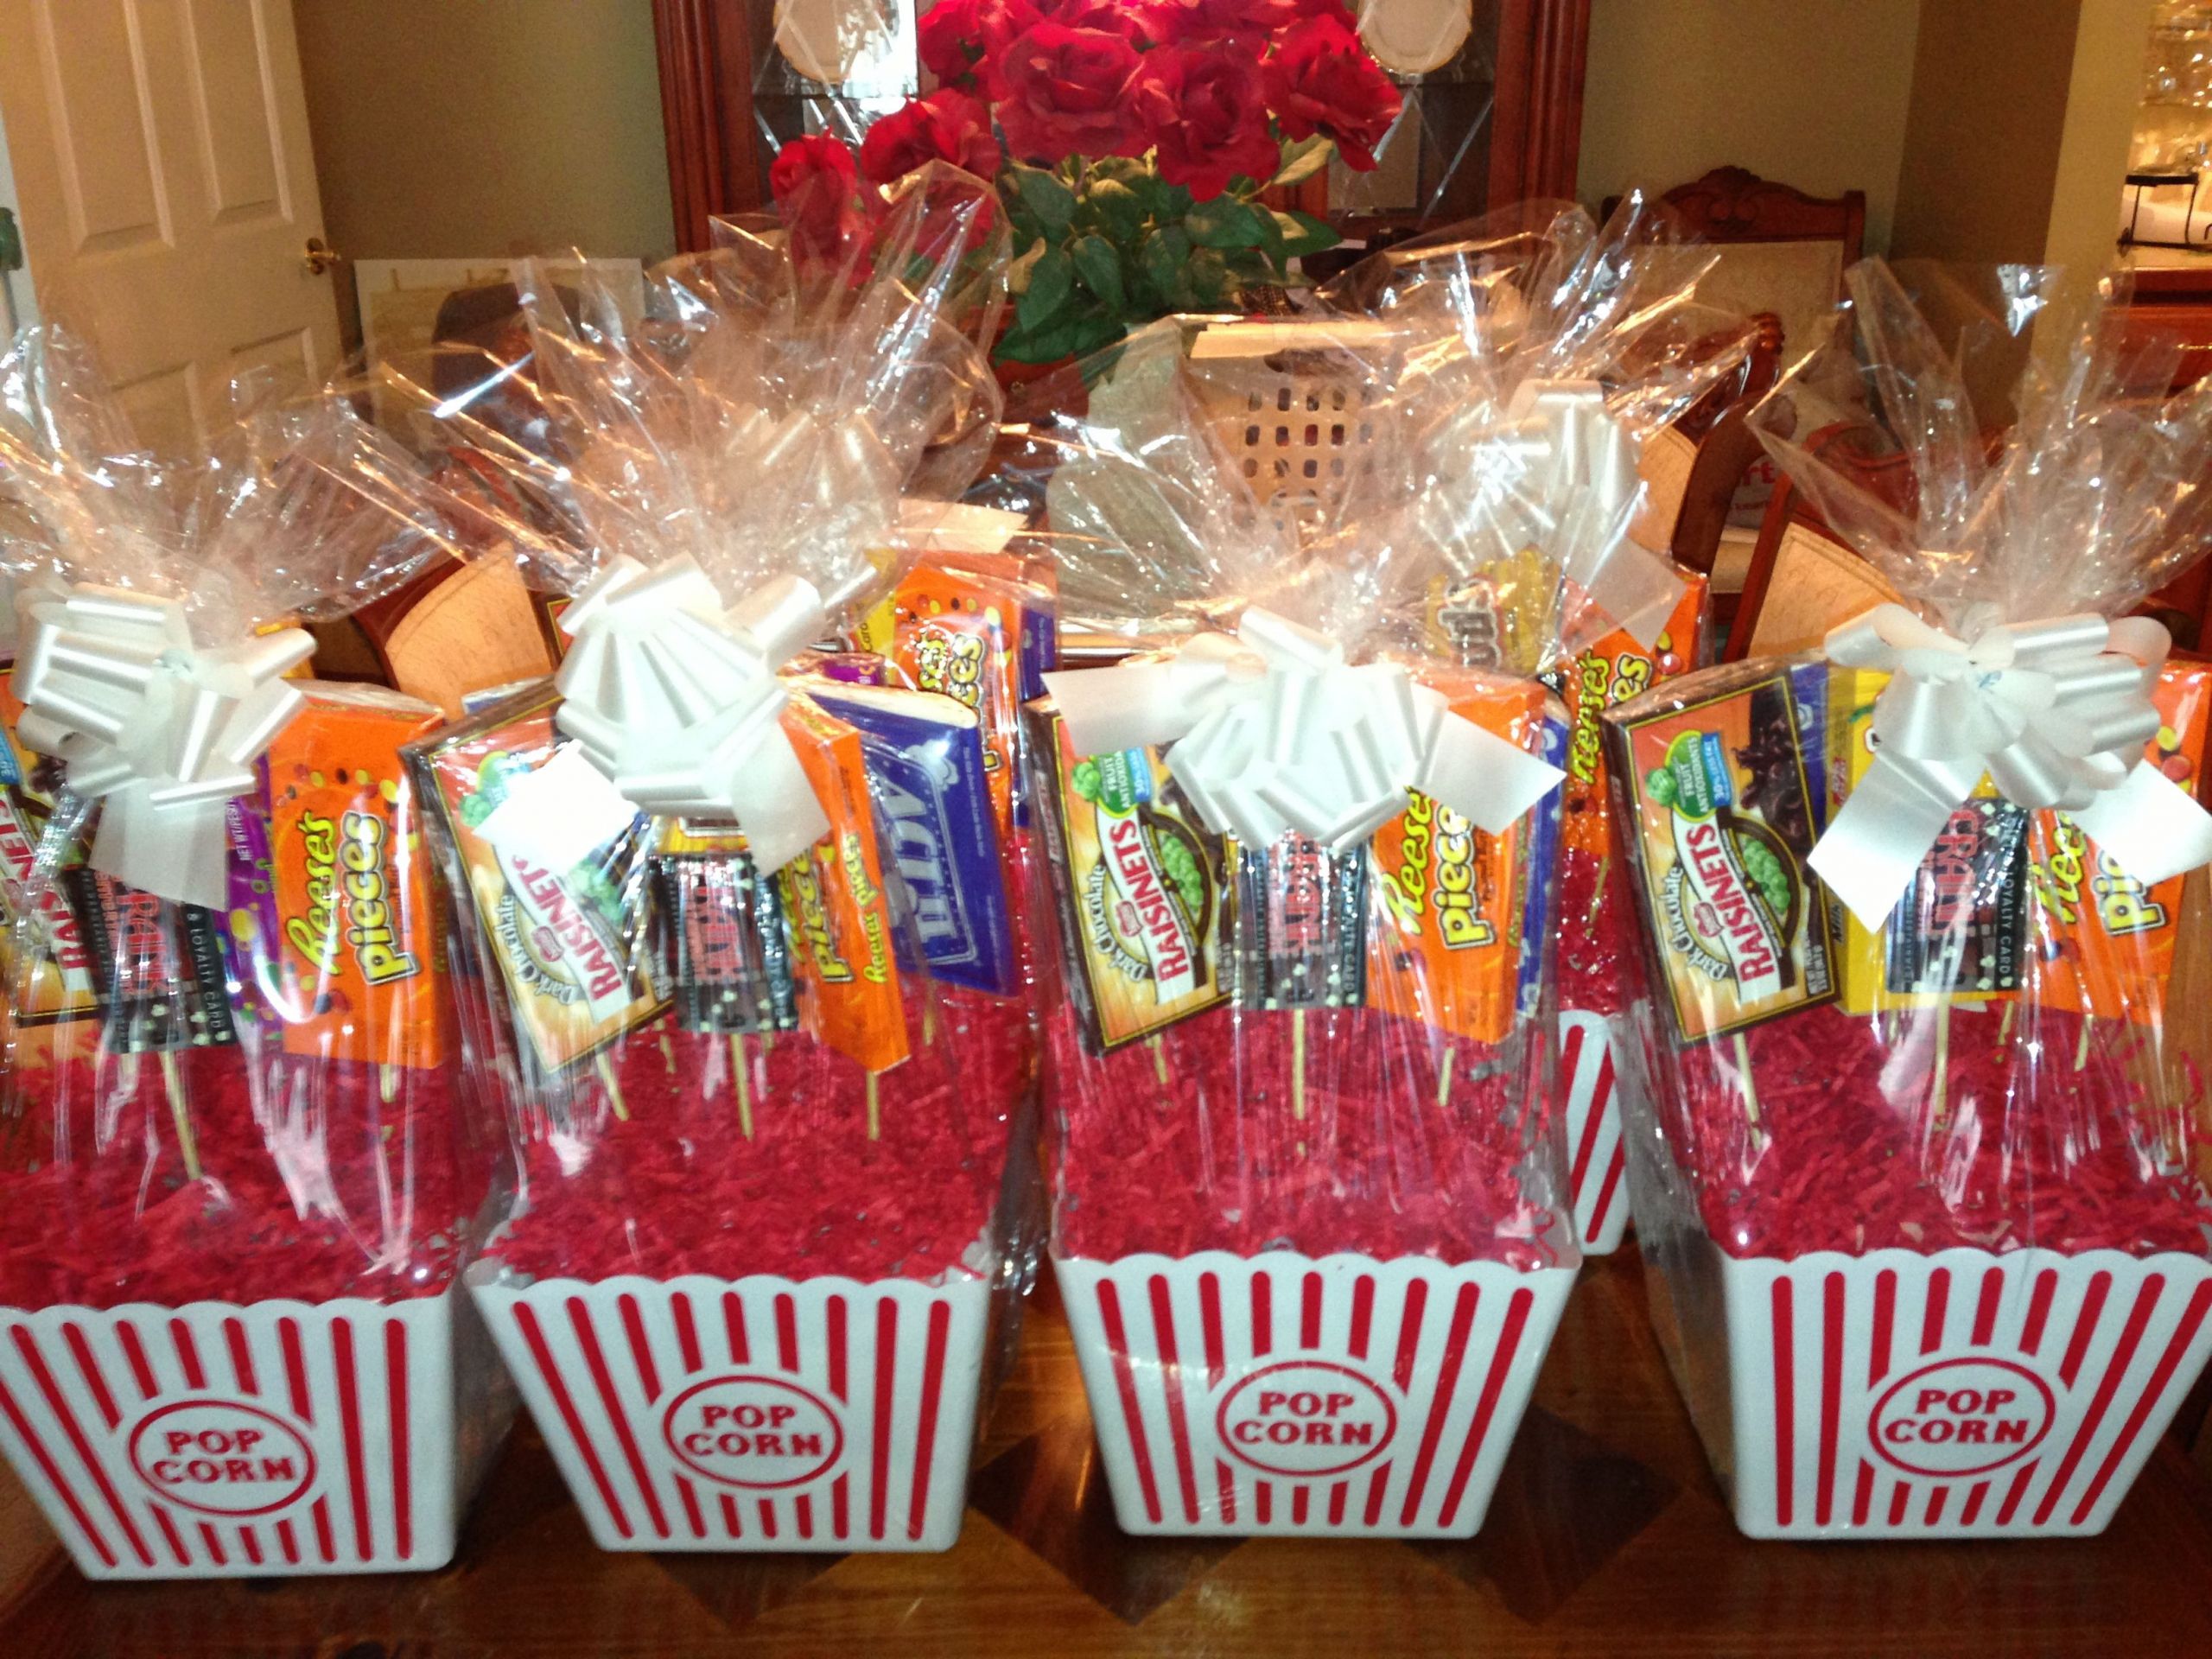 Movie Gift Card Basket Ideas
 Movie t baskets Each contains a $10 movie theatre t